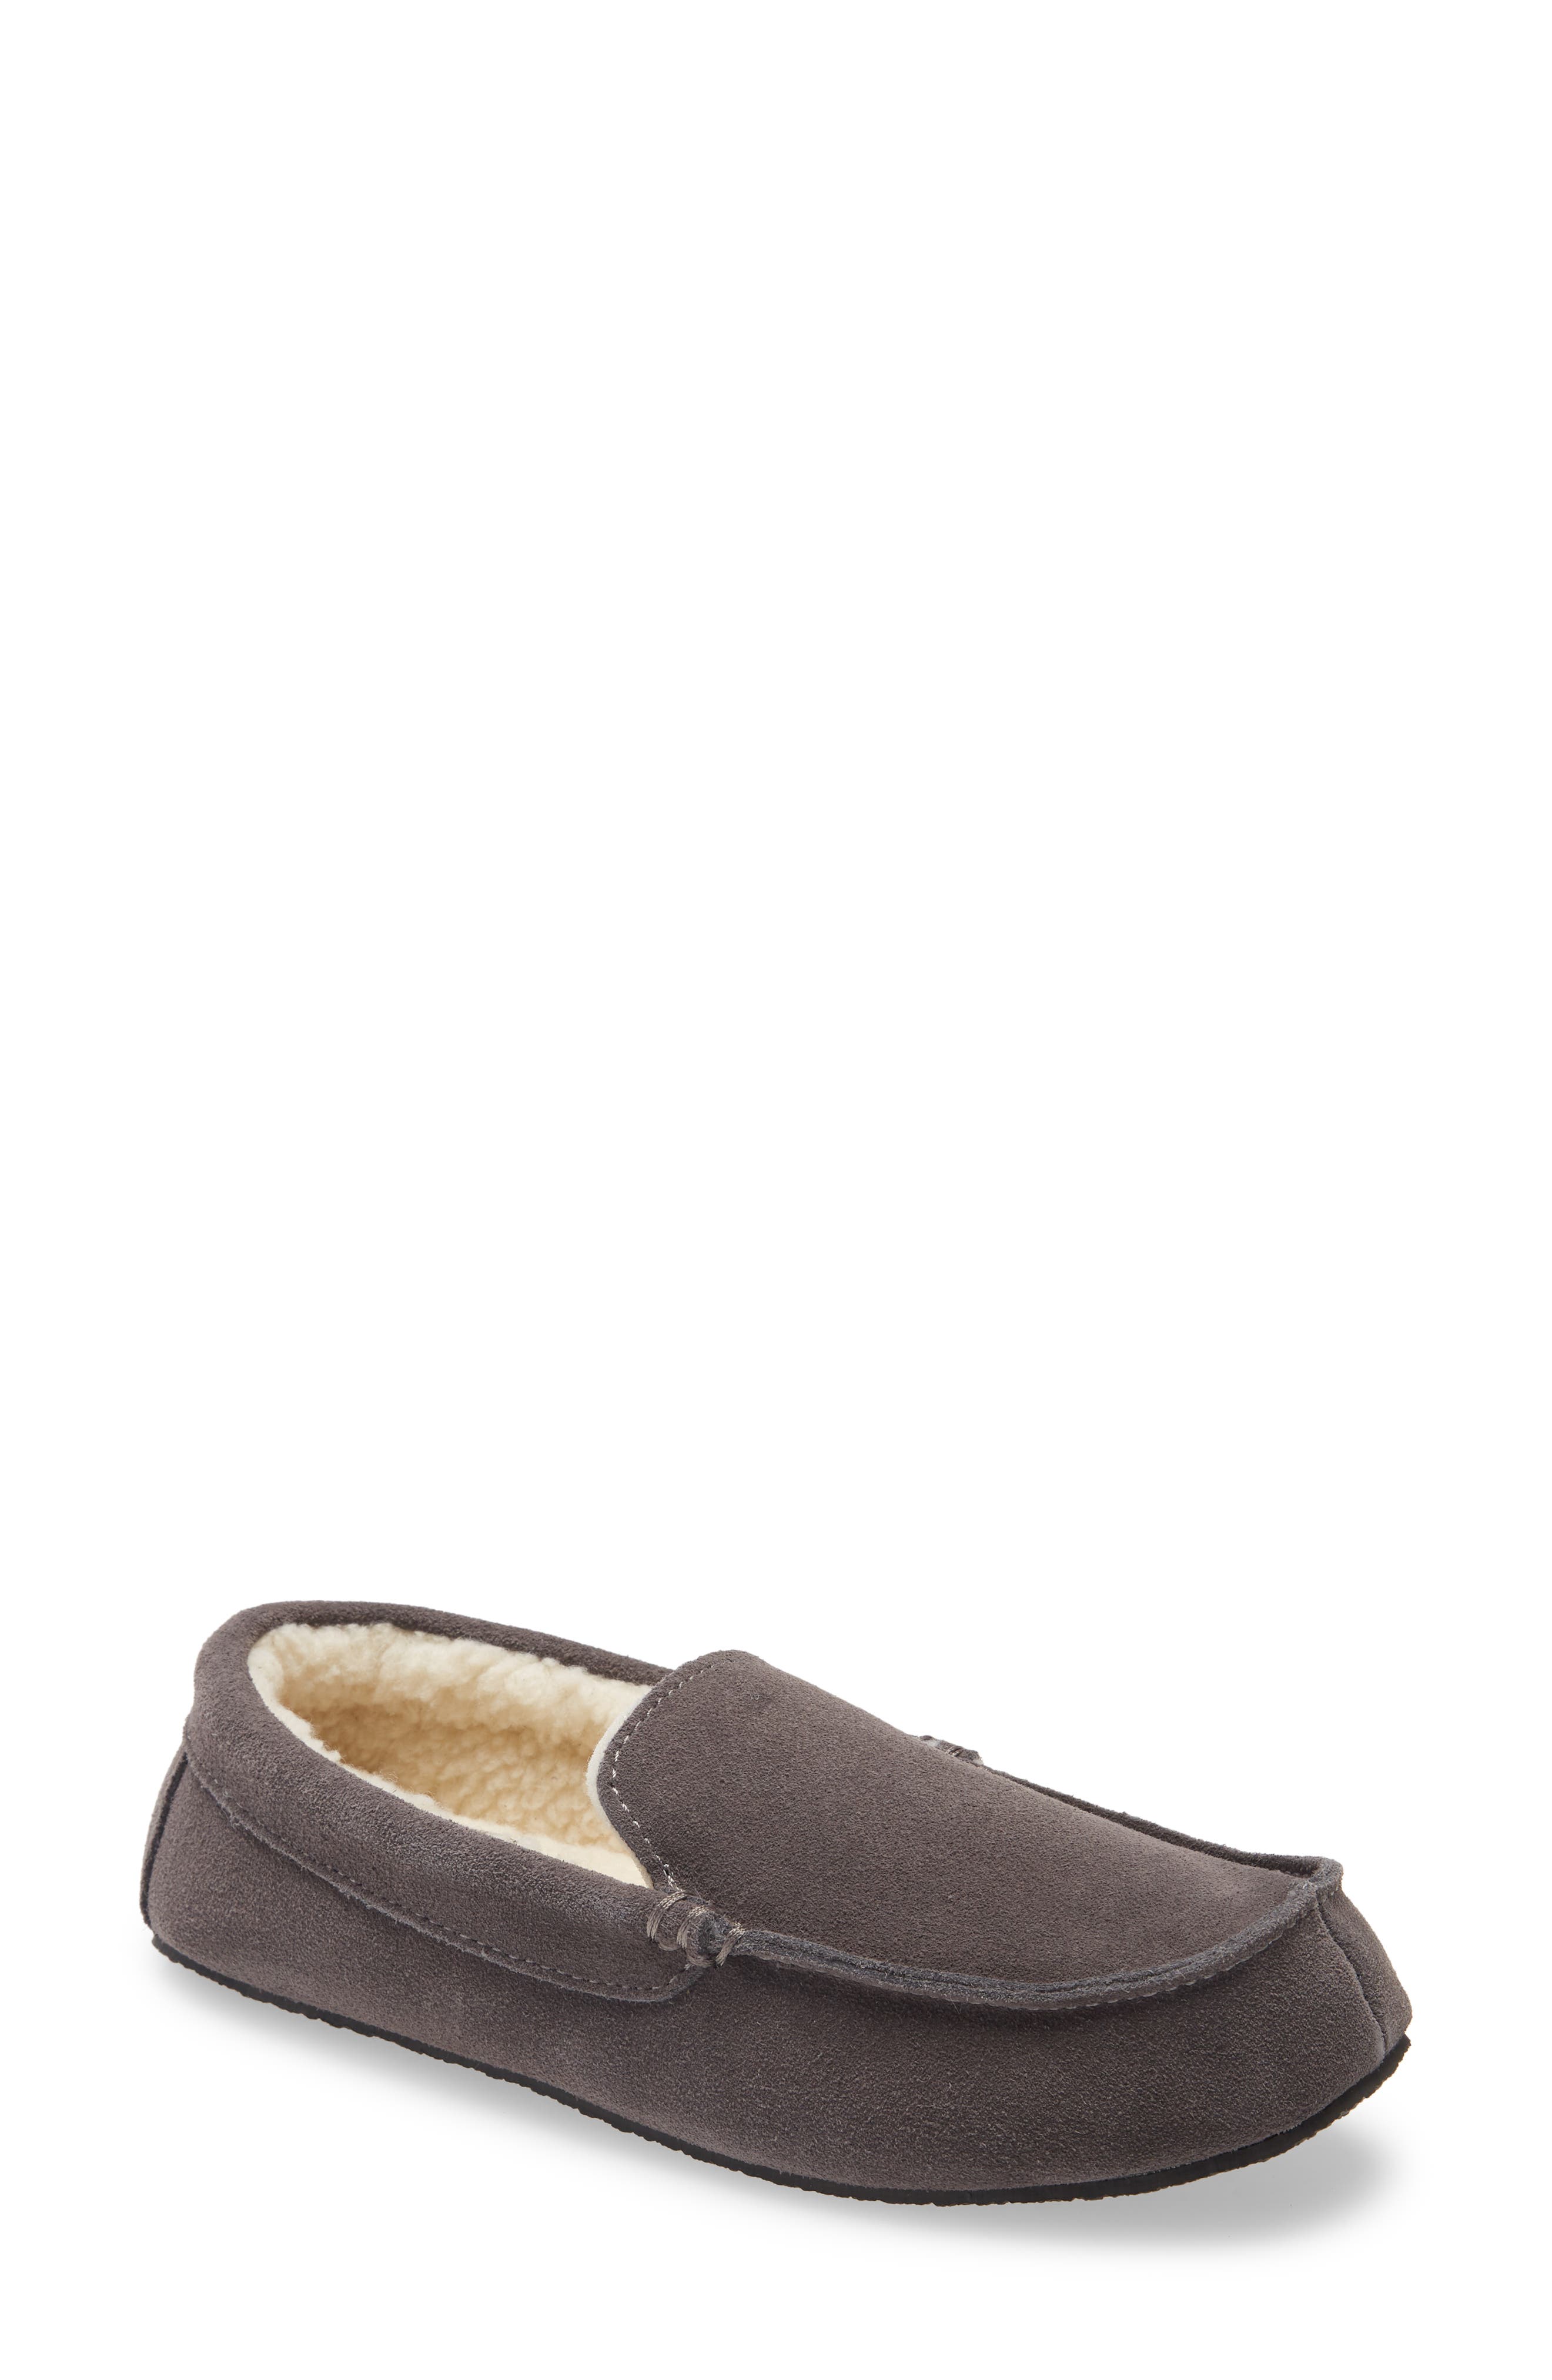 mens moccasin slippers without fur